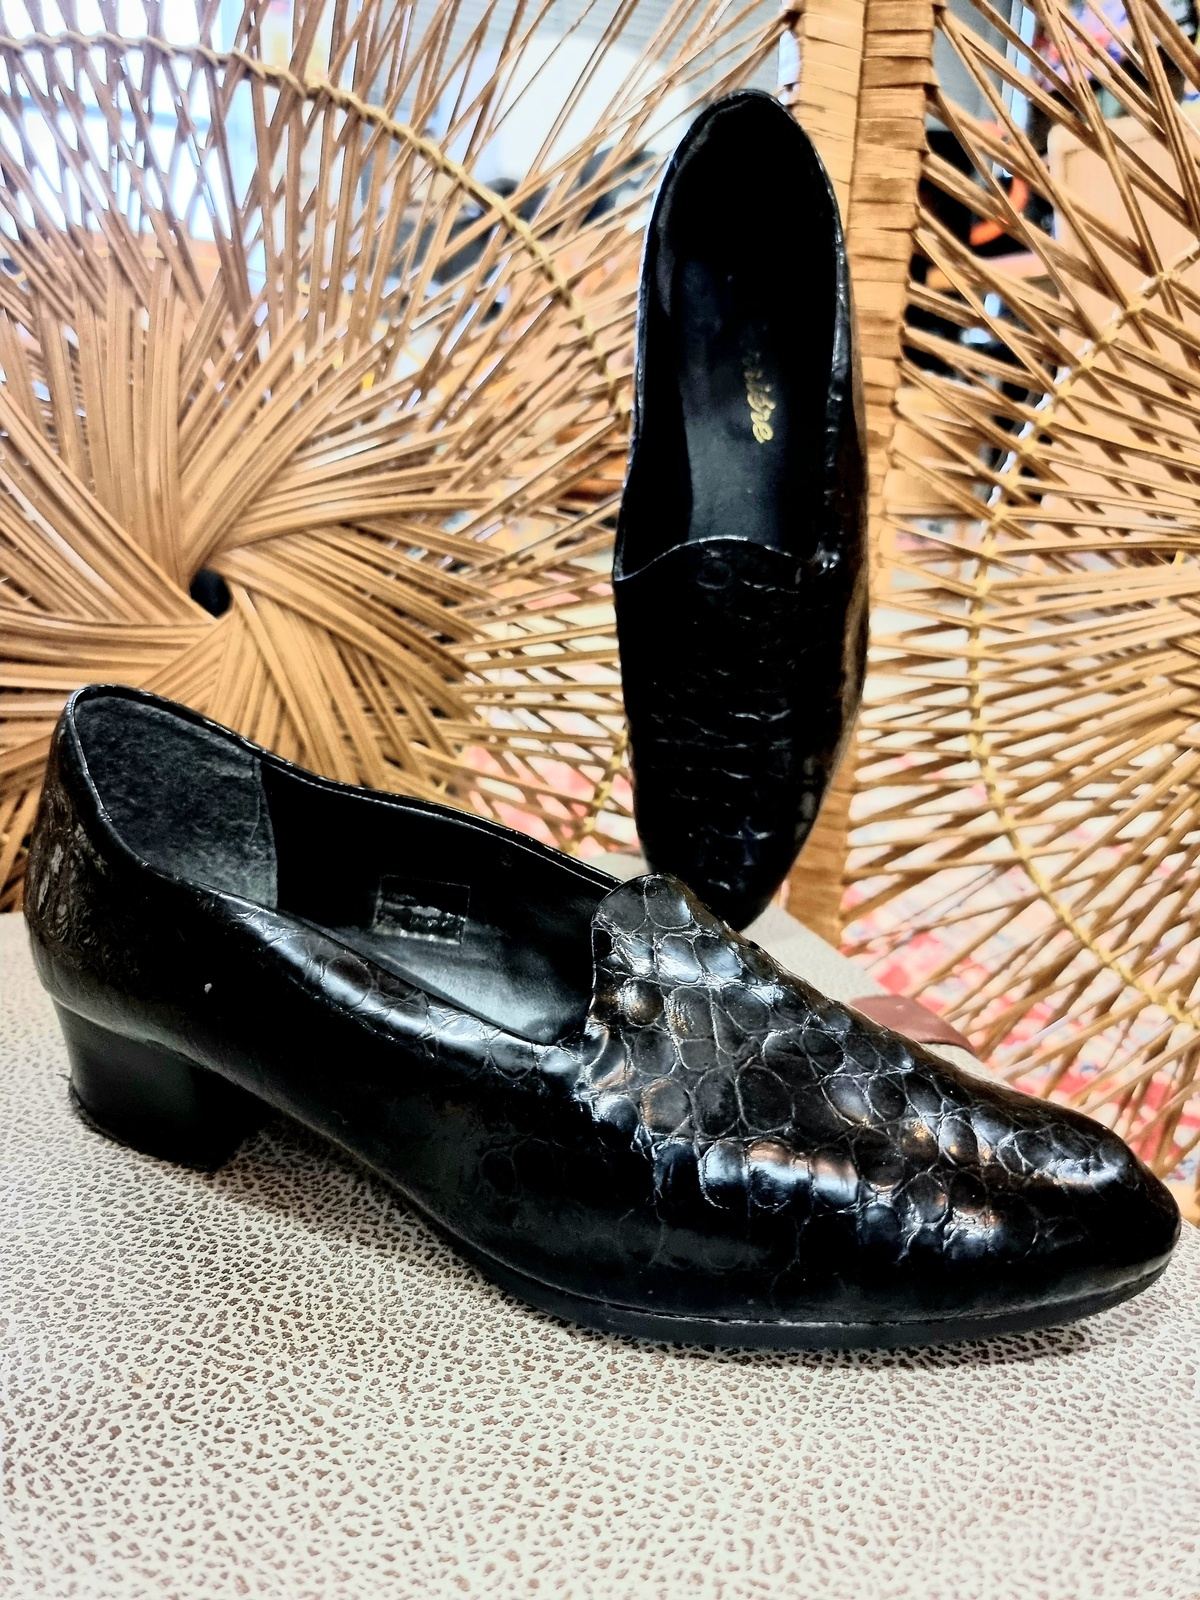 Vintage Carriere Shoes